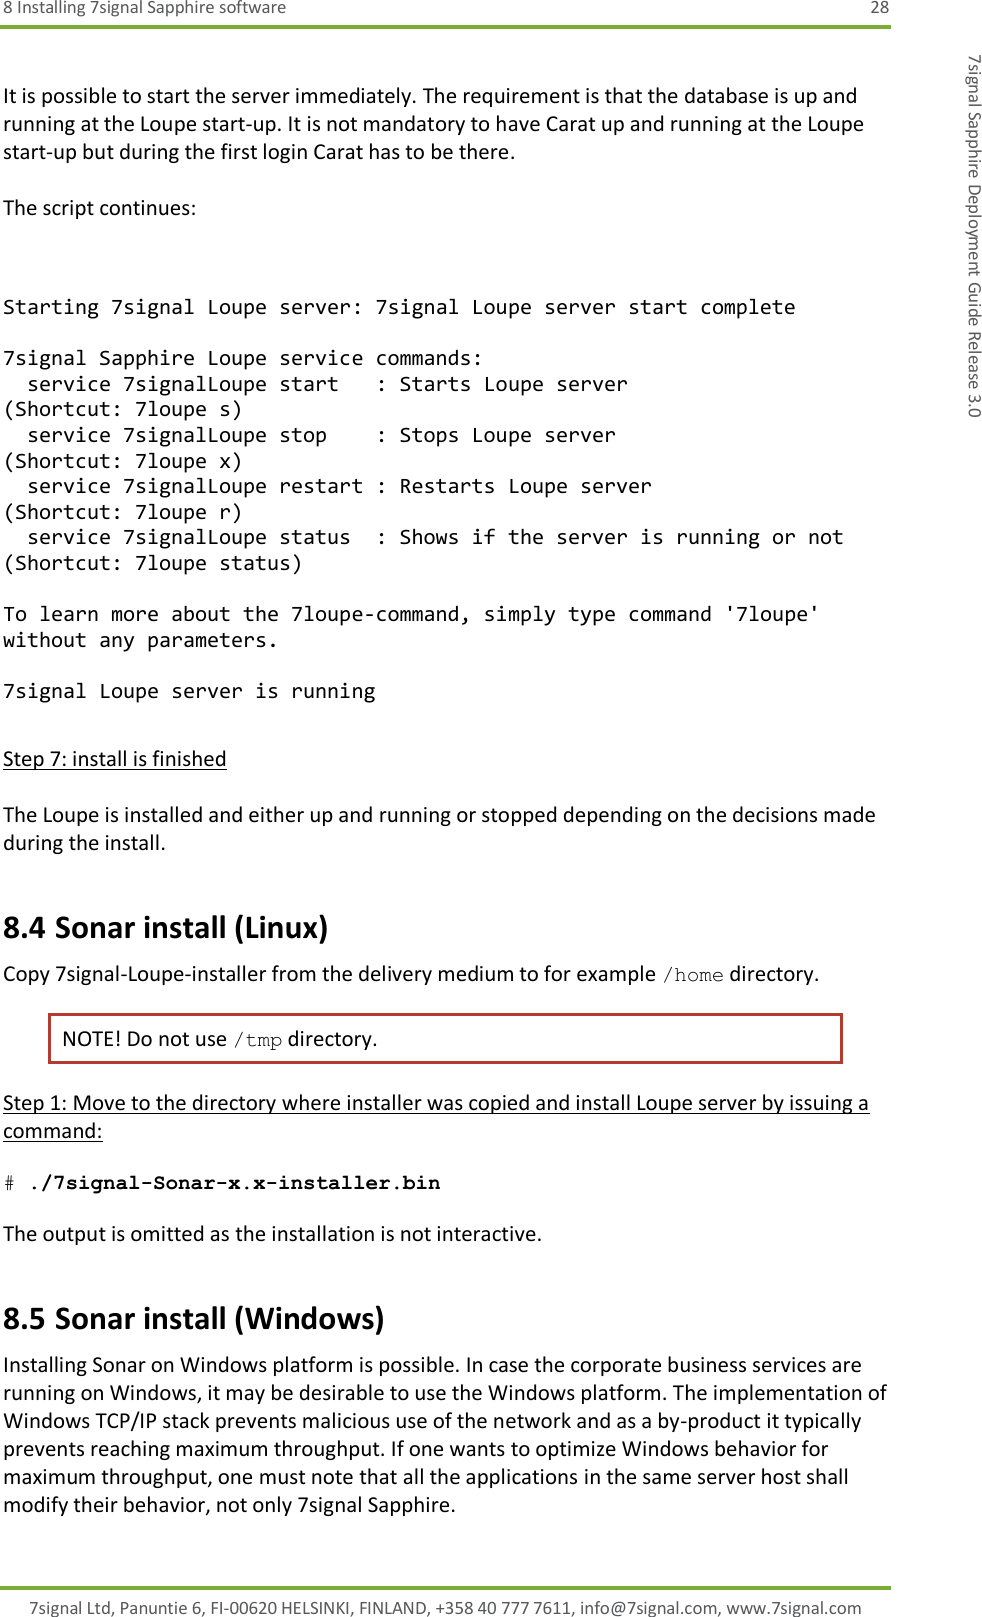 8 Installing 7signal Sapphire software  28 7signal Ltd, Panuntie 6, FI-00620 HELSINKI, FINLAND, +358 40 777 7611, info@7signal.com, www.7signal.com 7signal Sapphire Deployment Guide Release 3.0  It is possible to start the server immediately. The requirement is that the database is up and running at the Loupe start-up. It is not mandatory to have Carat up and running at the Loupe start-up but during the first login Carat has to be there.  The script continues:   Starting 7signal Loupe server: 7signal Loupe server start complete  7signal Sapphire Loupe service commands:   service 7signalLoupe start   : Starts Loupe server                   (Shortcut: 7loupe s)   service 7signalLoupe stop    : Stops Loupe server                    (Shortcut: 7loupe x)   service 7signalLoupe restart : Restarts Loupe server                 (Shortcut: 7loupe r)   service 7signalLoupe status  : Shows if the server is running or not (Shortcut: 7loupe status)  To learn more about the 7loupe-command, simply type command &apos;7loupe&apos; without any parameters.  7signal Loupe server is running  Step 7: install is finished  The Loupe is installed and either up and running or stopped depending on the decisions made during the install. 8.4 Sonar install (Linux) Copy 7signal-Loupe-installer from the delivery medium to for example /home directory.  NOTE! Do not use /tmp directory. Step 1: Move to the directory where installer was copied and install Loupe server by issuing a command:  # ./7signal-Sonar-x.x-installer.bin  The output is omitted as the installation is not interactive. 8.5 Sonar install (Windows) Installing Sonar on Windows platform is possible. In case the corporate business services are running on Windows, it may be desirable to use the Windows platform. The implementation of Windows TCP/IP stack prevents malicious use of the network and as a by-product it typically prevents reaching maximum throughput. If one wants to optimize Windows behavior for maximum throughput, one must note that all the applications in the same server host shall modify their behavior, not only 7signal Sapphire. 